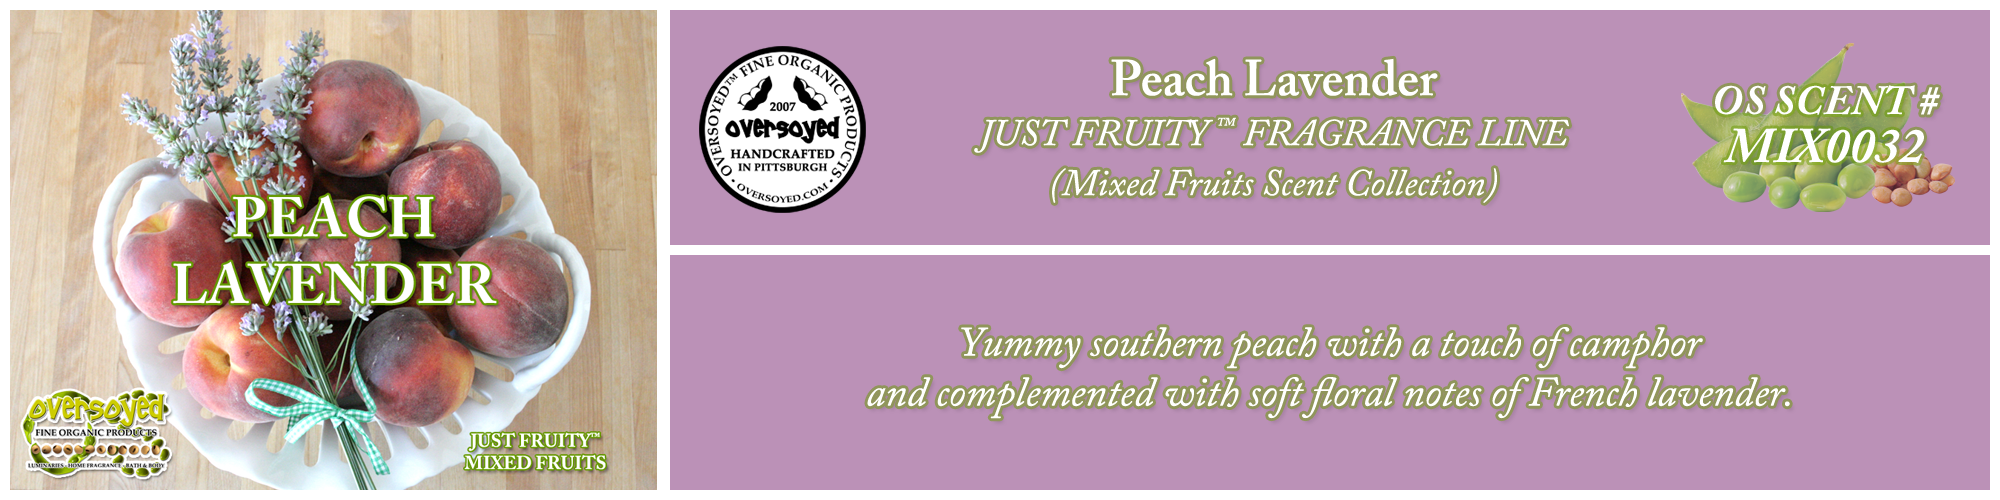 Peach Lavender Handcrafted Products Collection